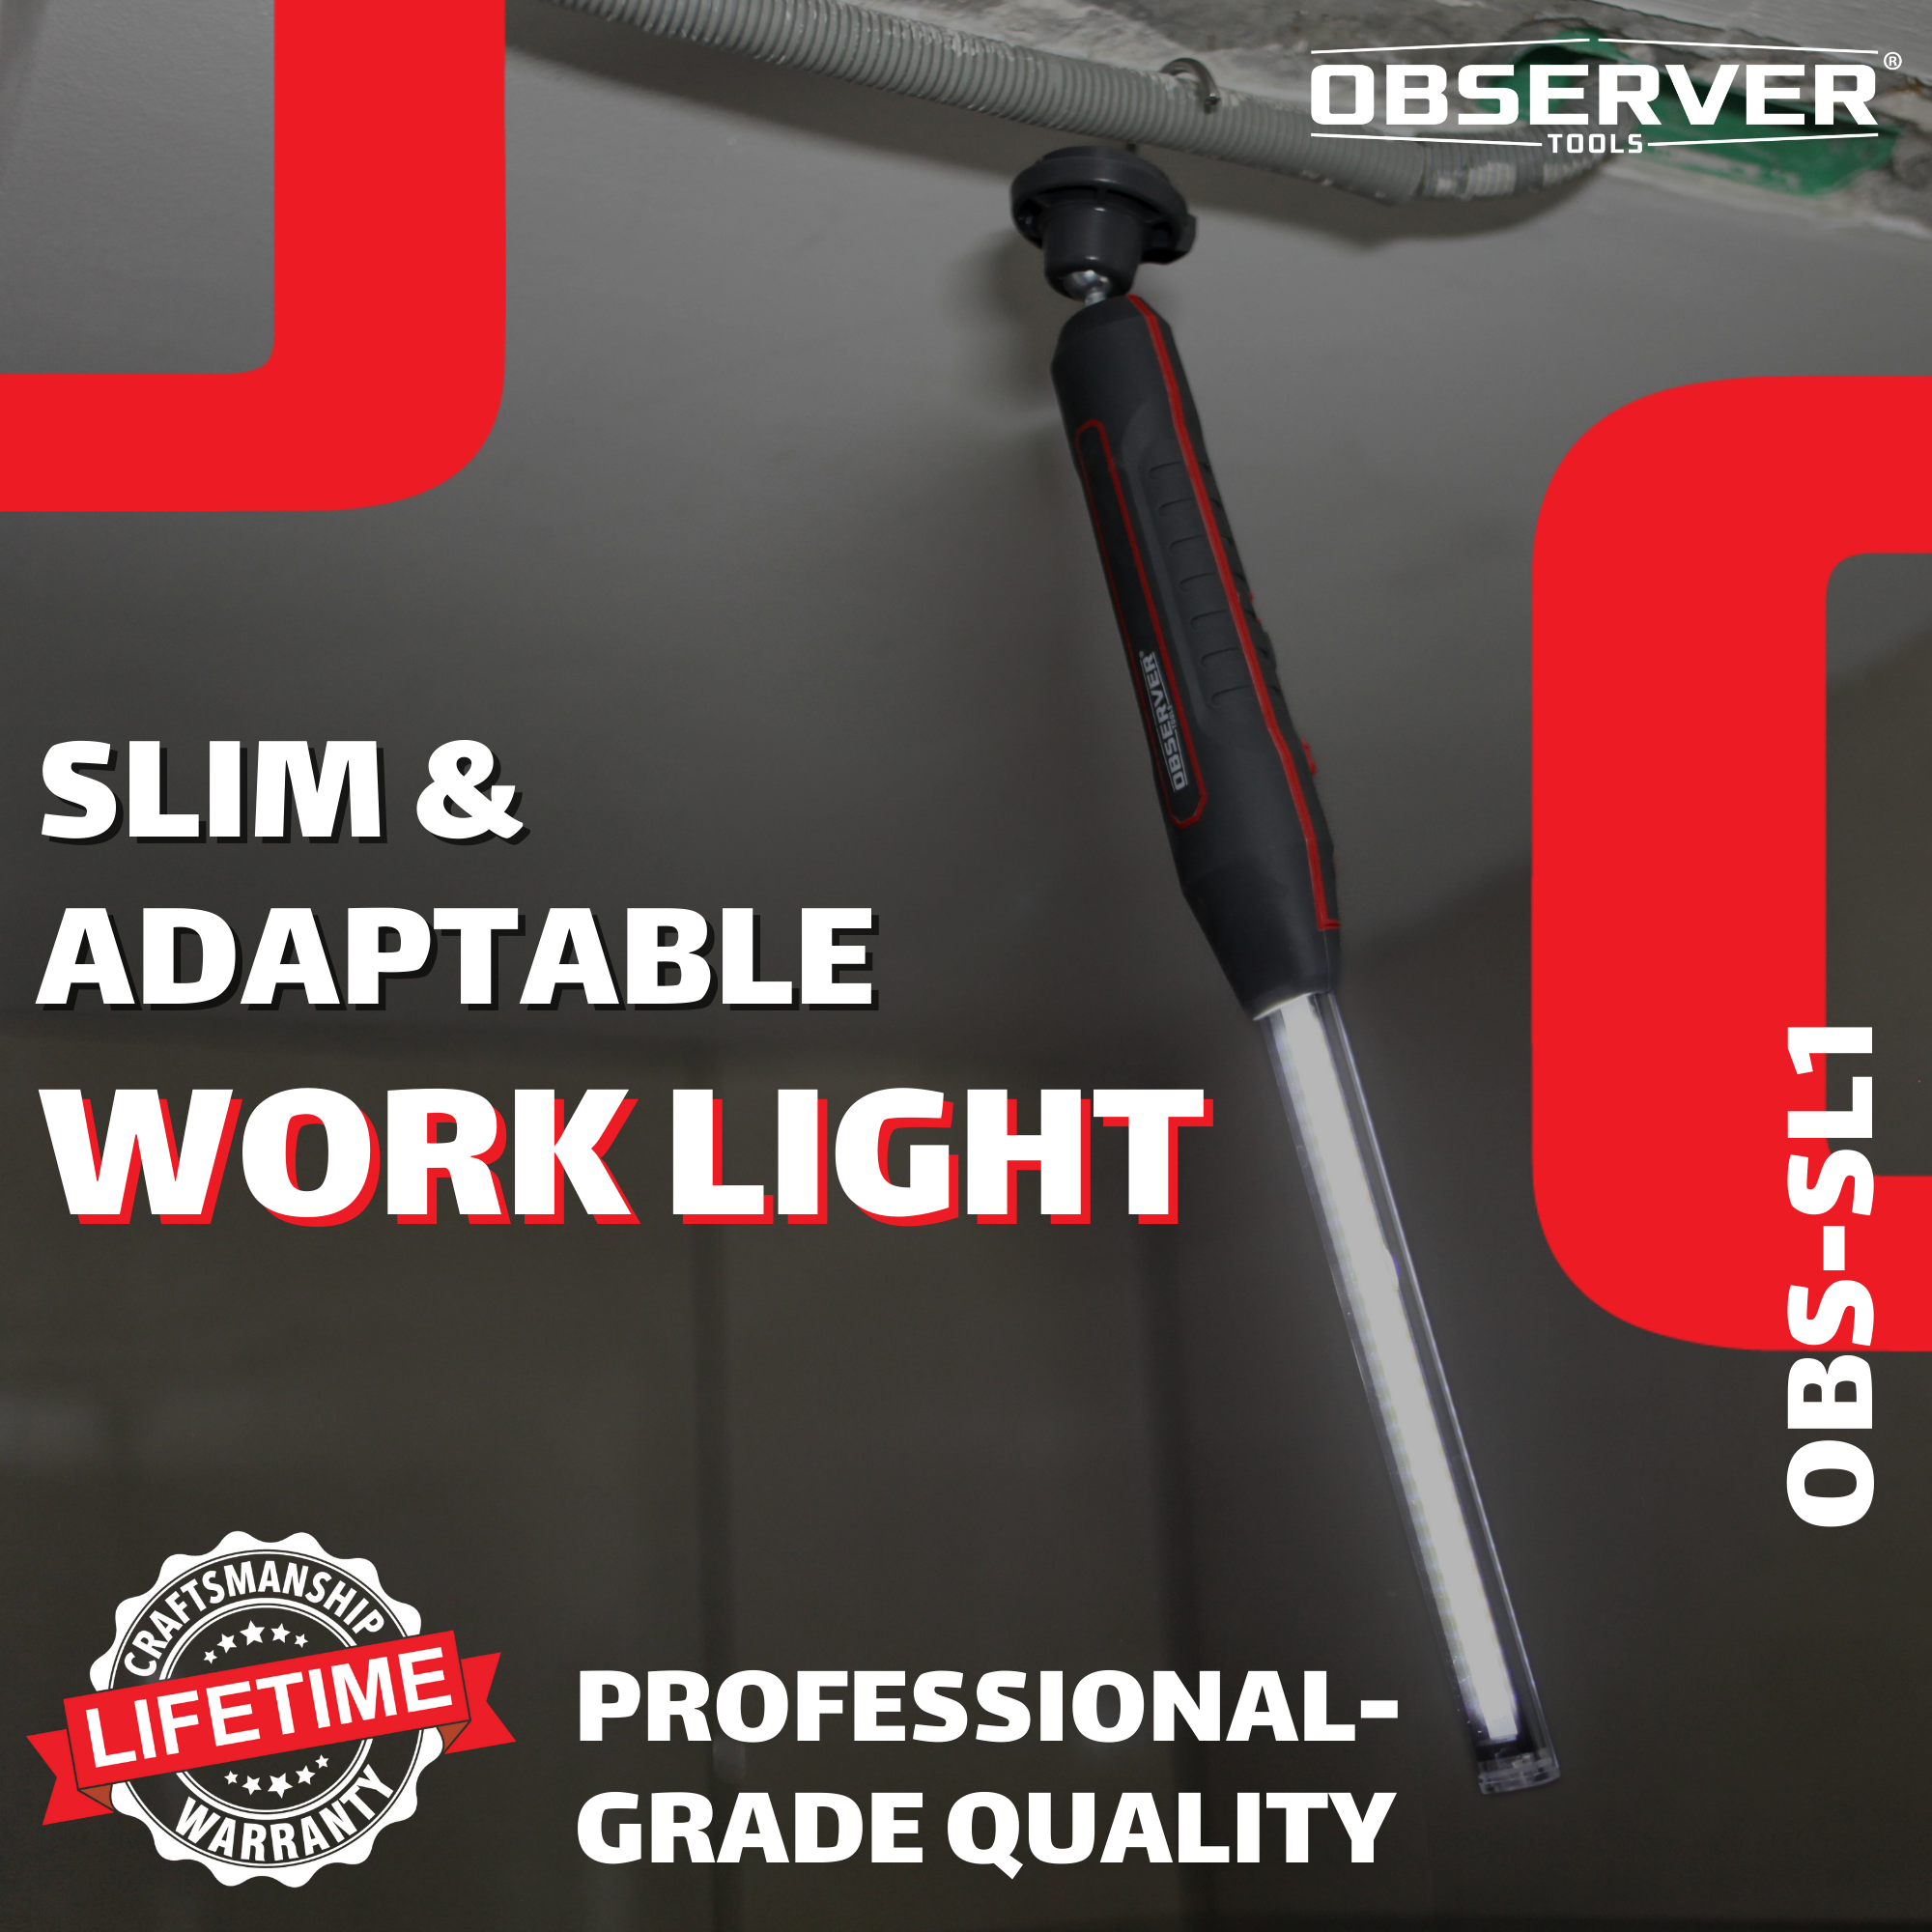 900 Lumen Dual-Lamp LED Rechargeable Slim Light with Stepless Dimming and Magnetic-Pivoting Base